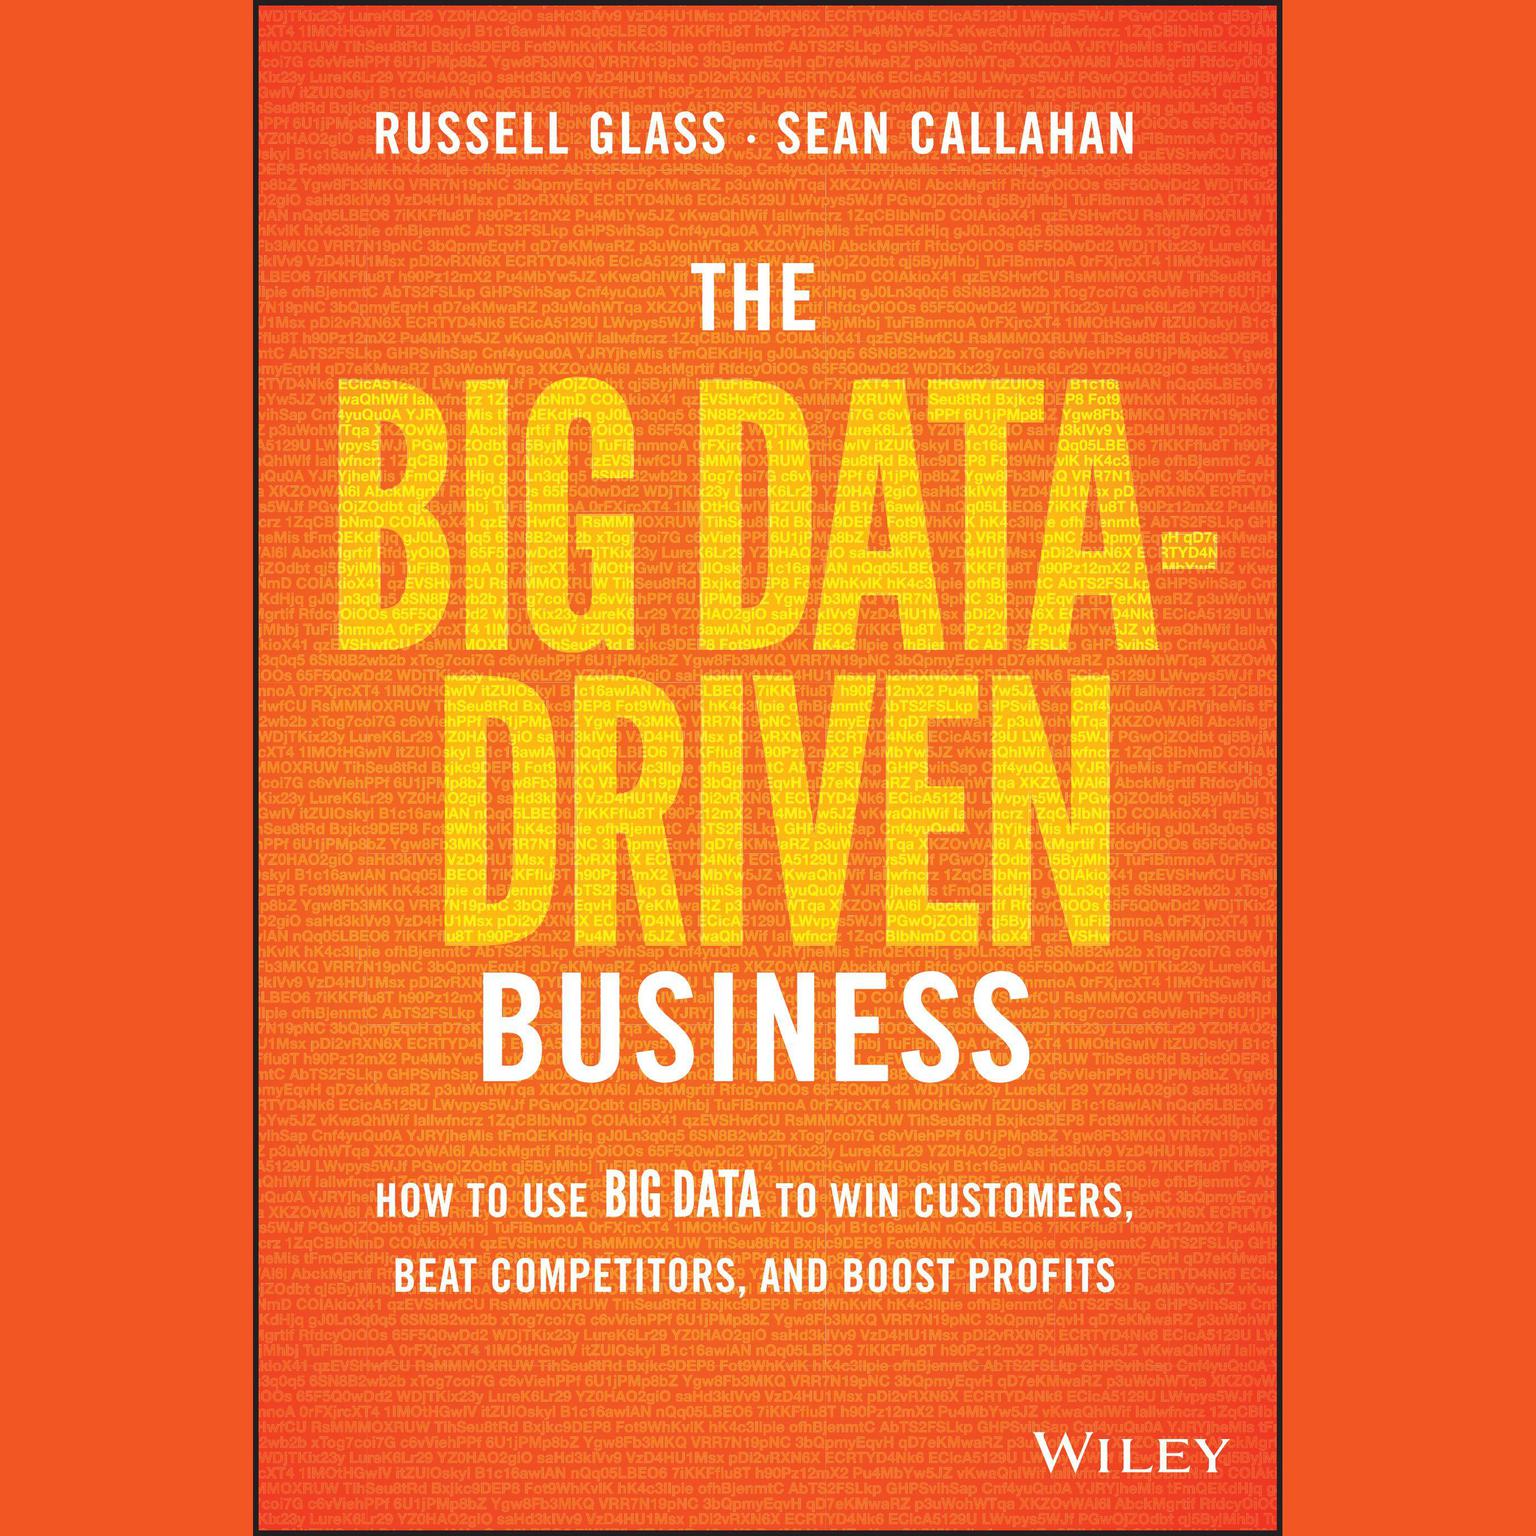 The Big Data-Driven Business: How to Use Big Data to Win Customers, Beat Competitors, and Boost Profits Audiobook, by Russell Glass